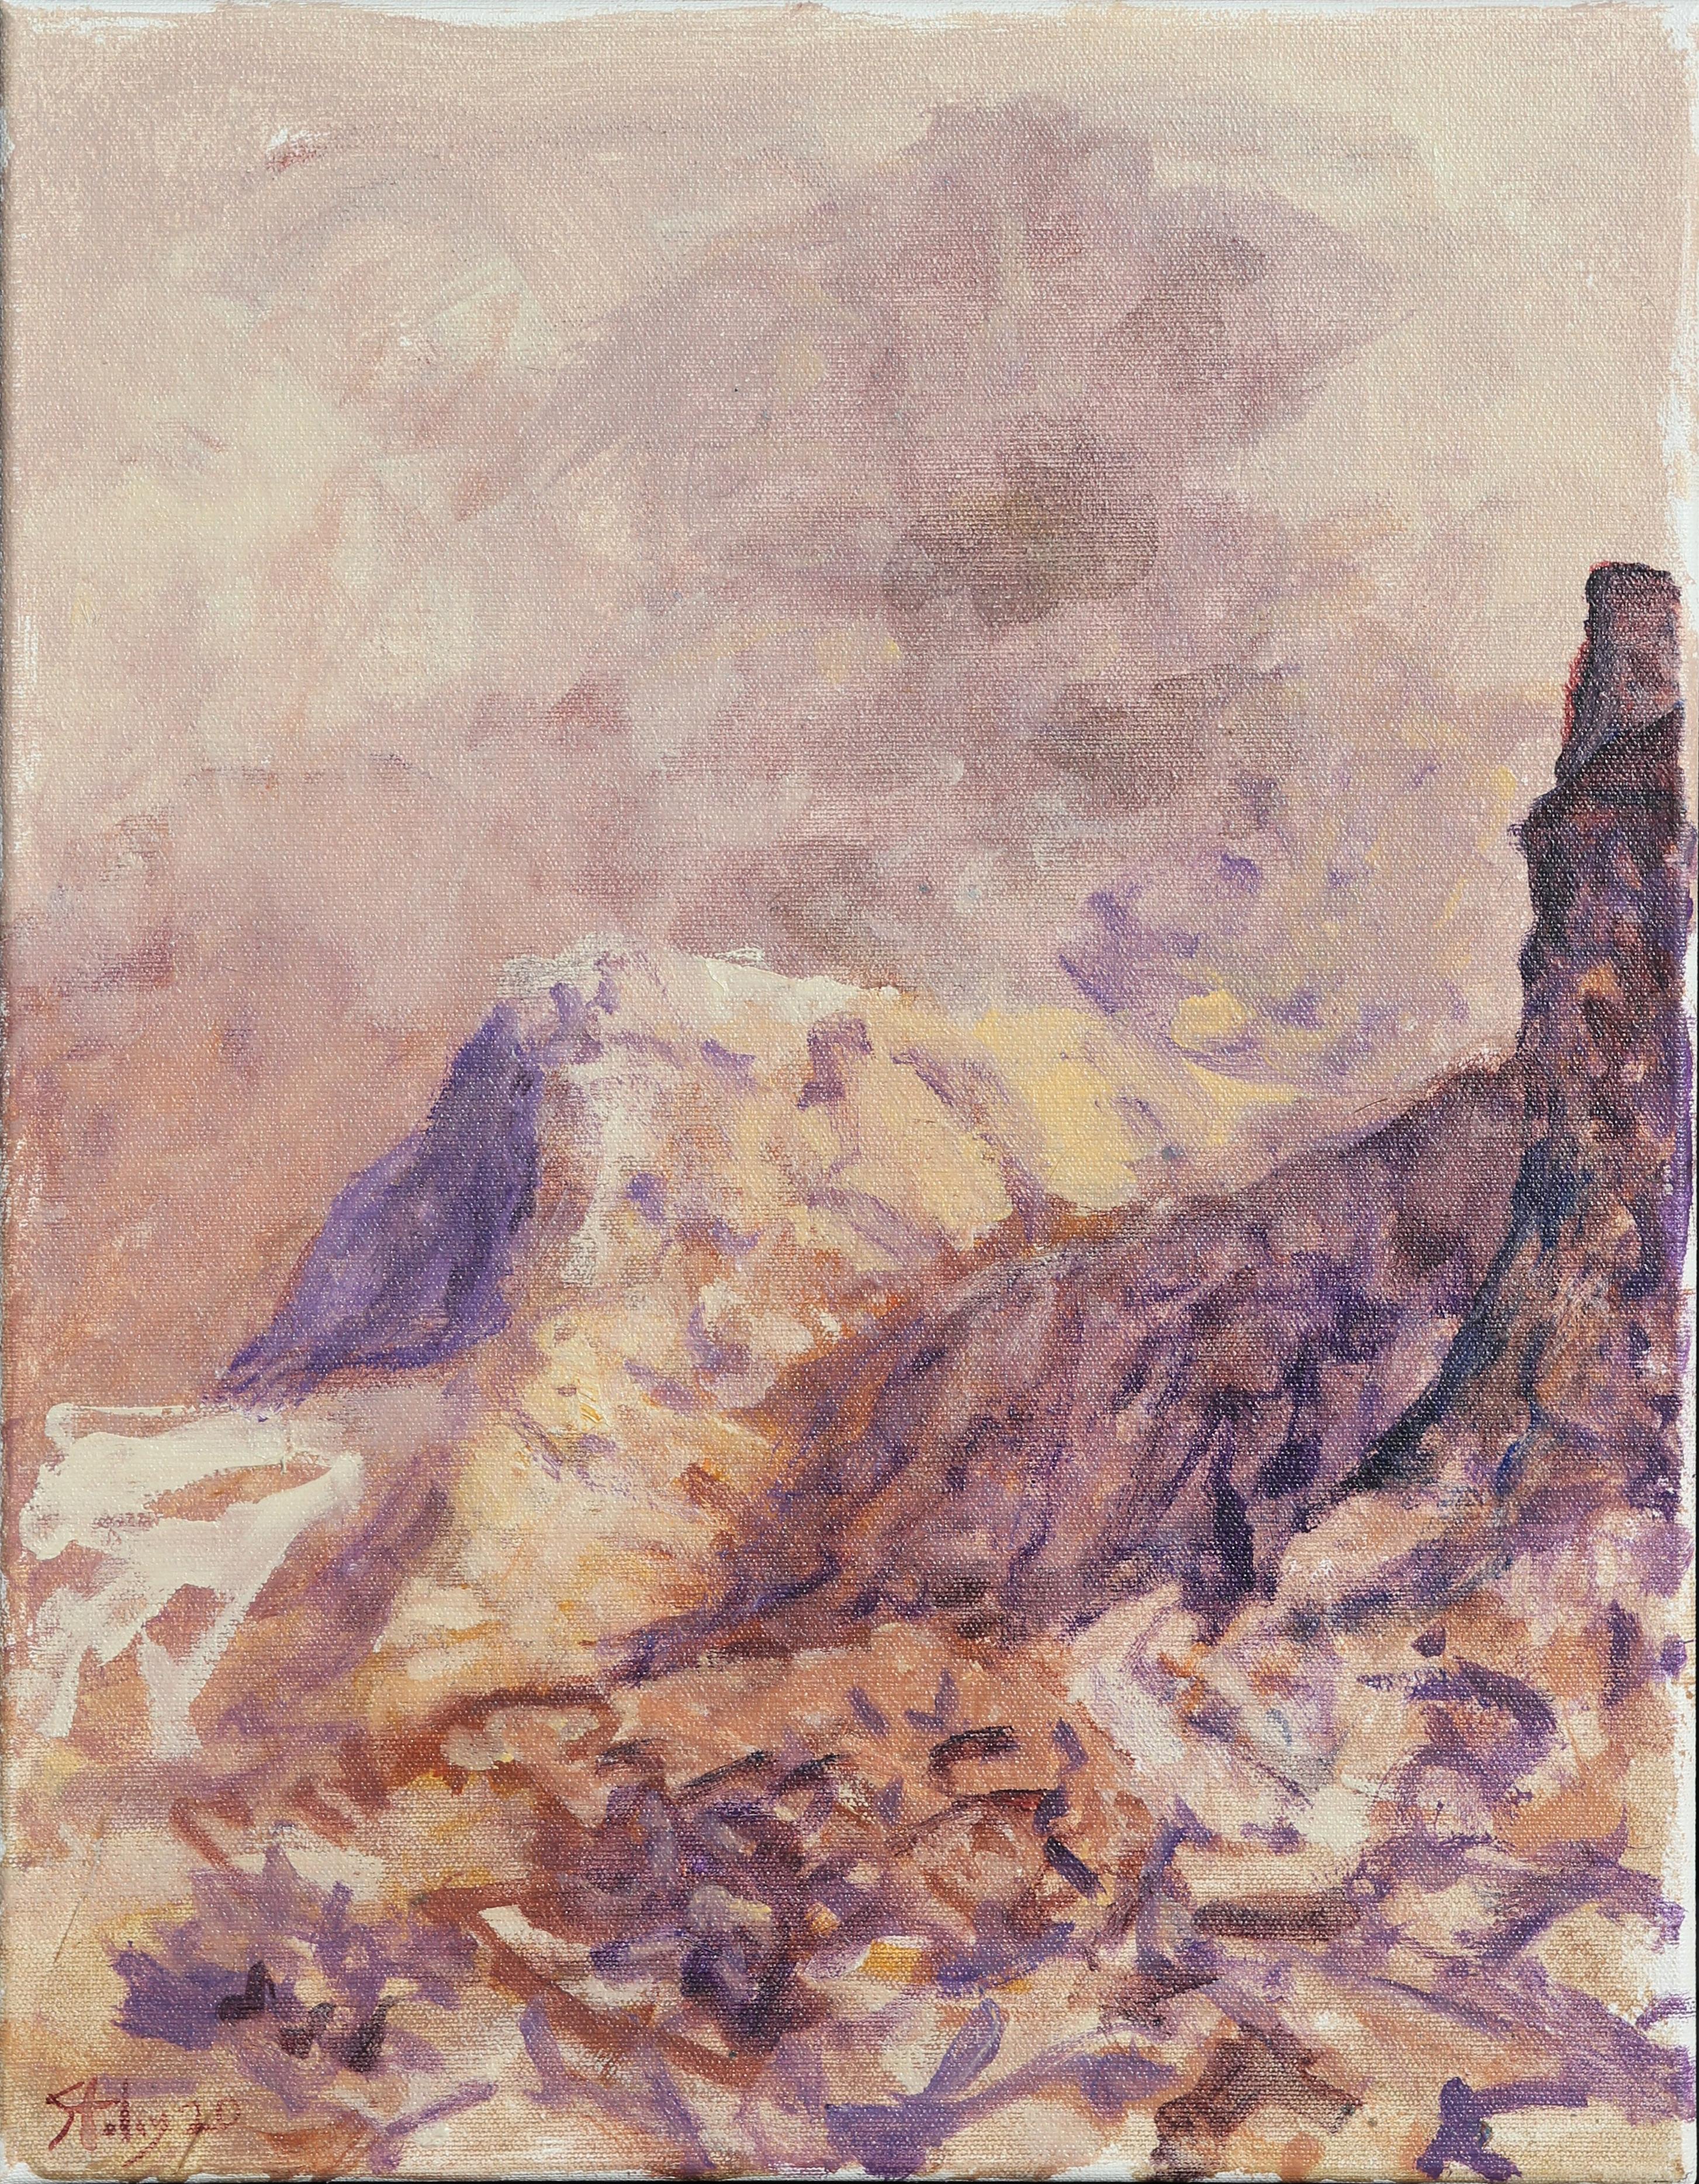 Earl Staley Abstract Painting - "Western Landscape 4" Pastel Pink and Purple Toned Mountain Landscape Painting